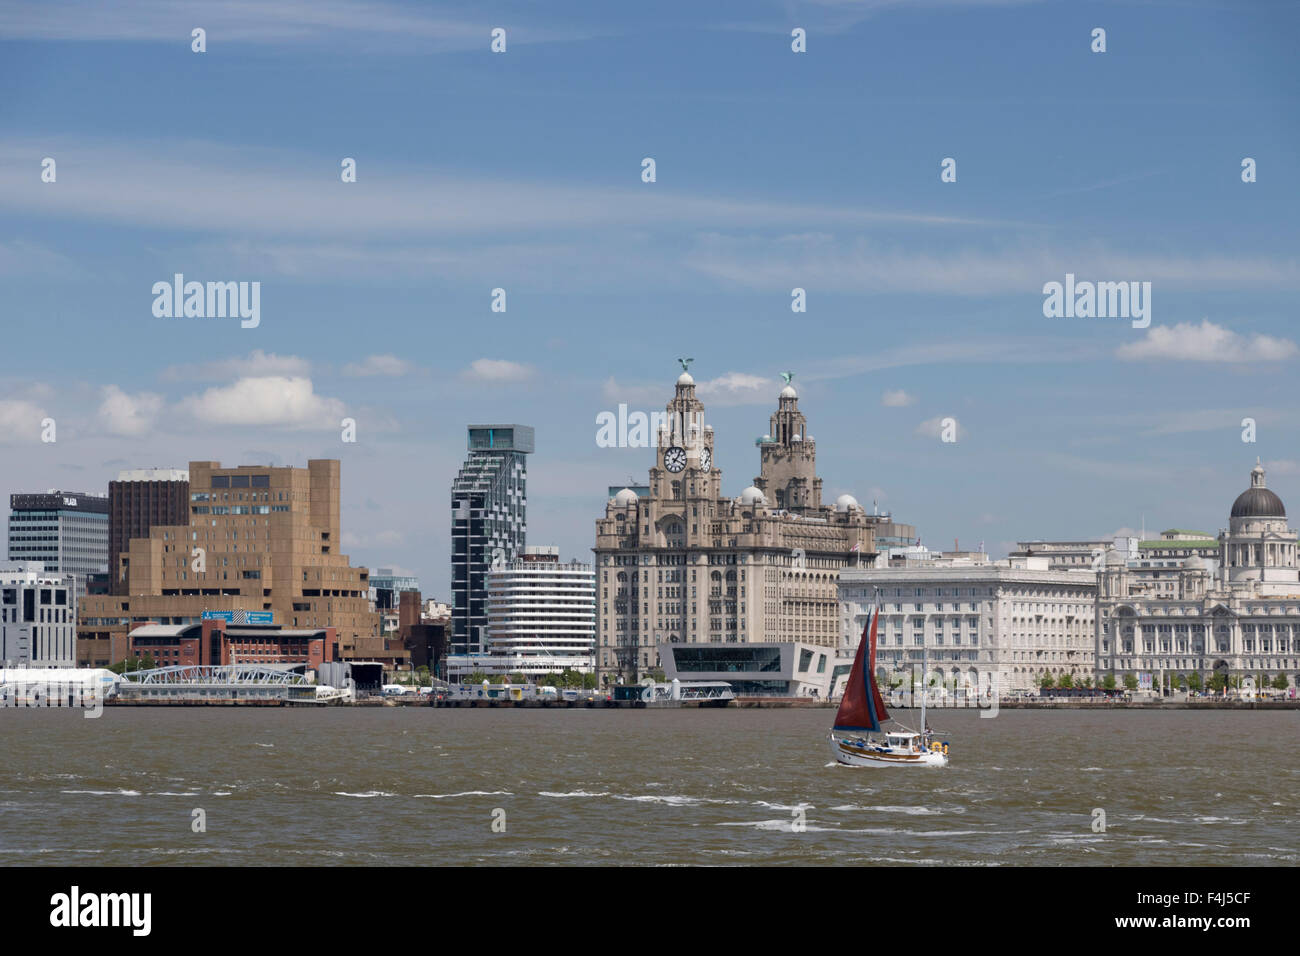 The Royal Liver Building from the Mersey, UNESCO World Heritage Site, Liverpool, Merseyside, England, United Kingdom, Europe Stock Photo